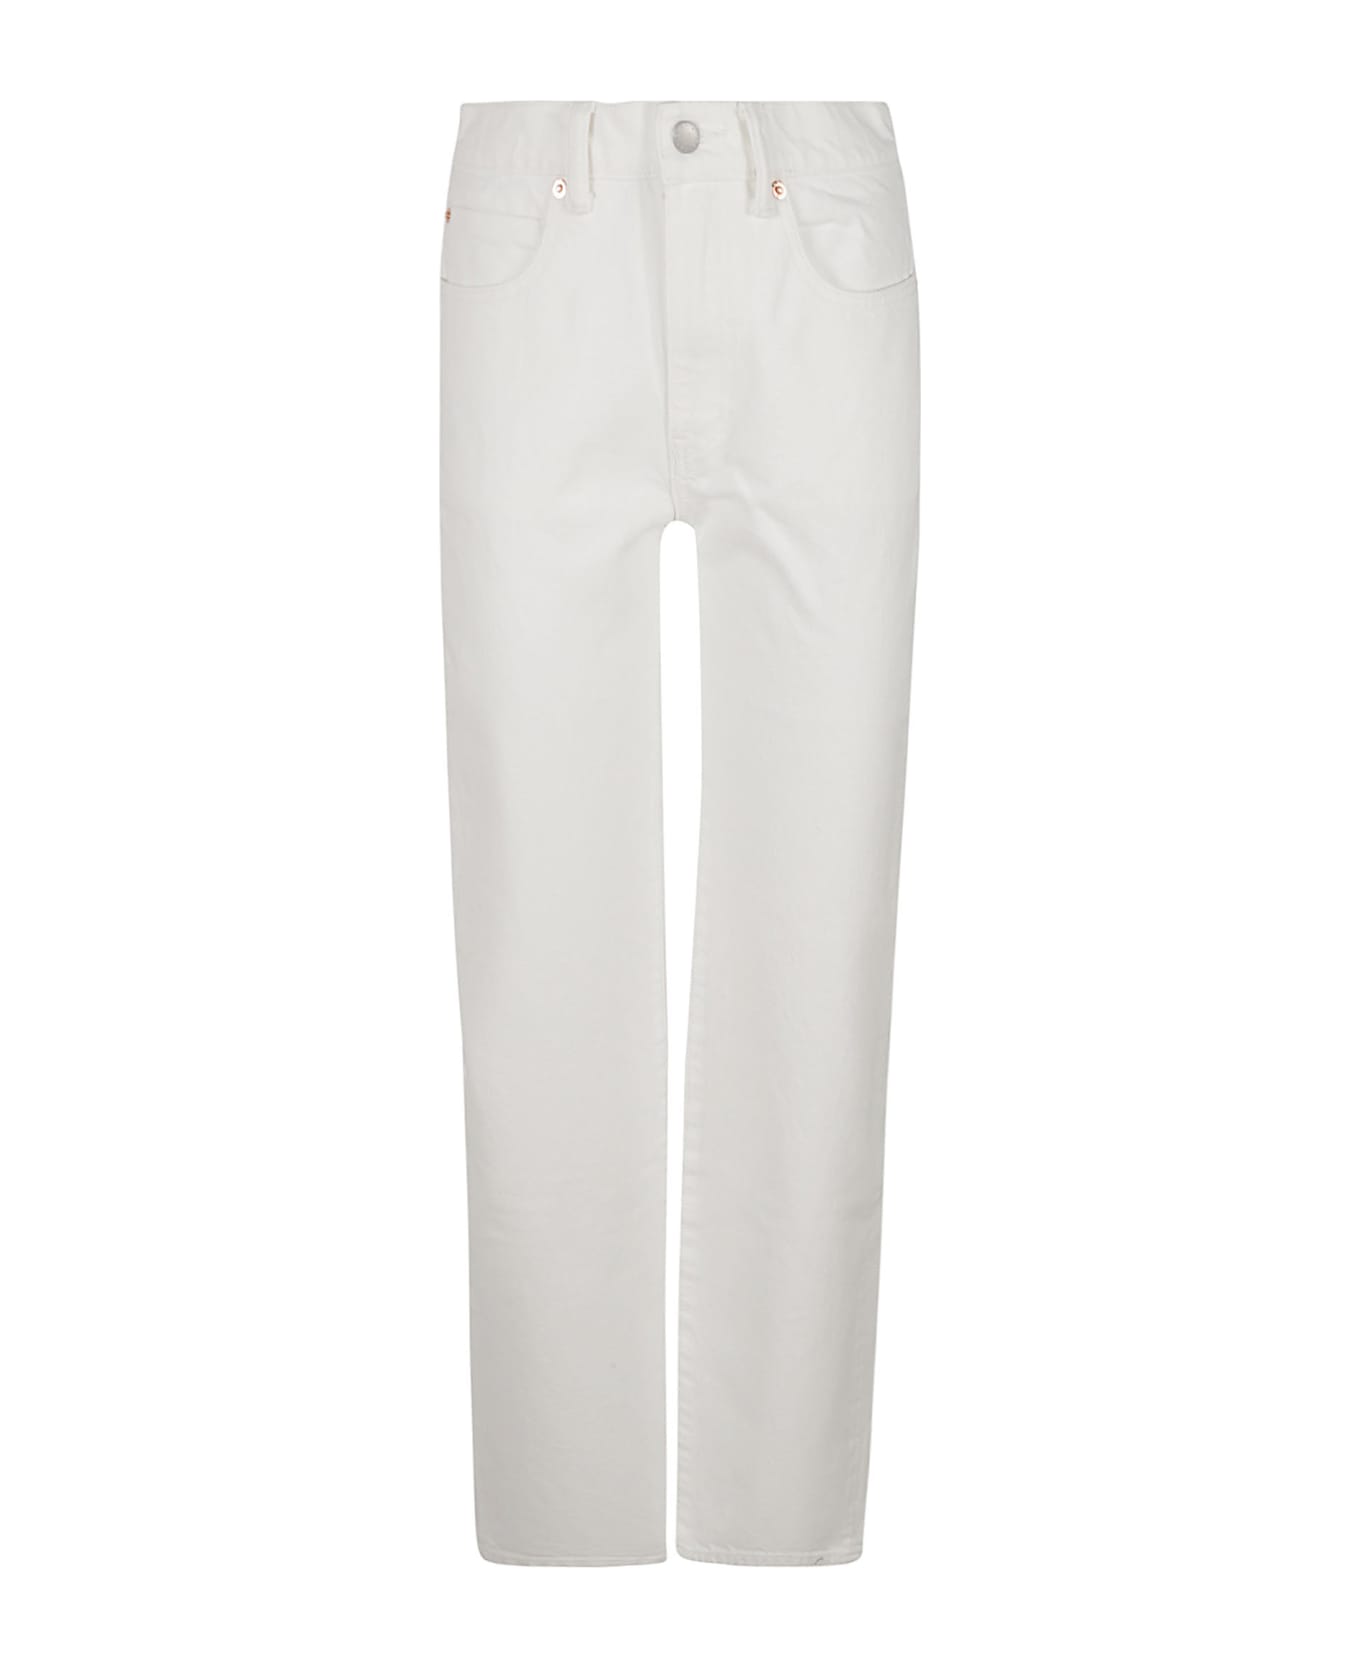 Alexander Wang Mid Rise Relaxe Jeans - Vintage White